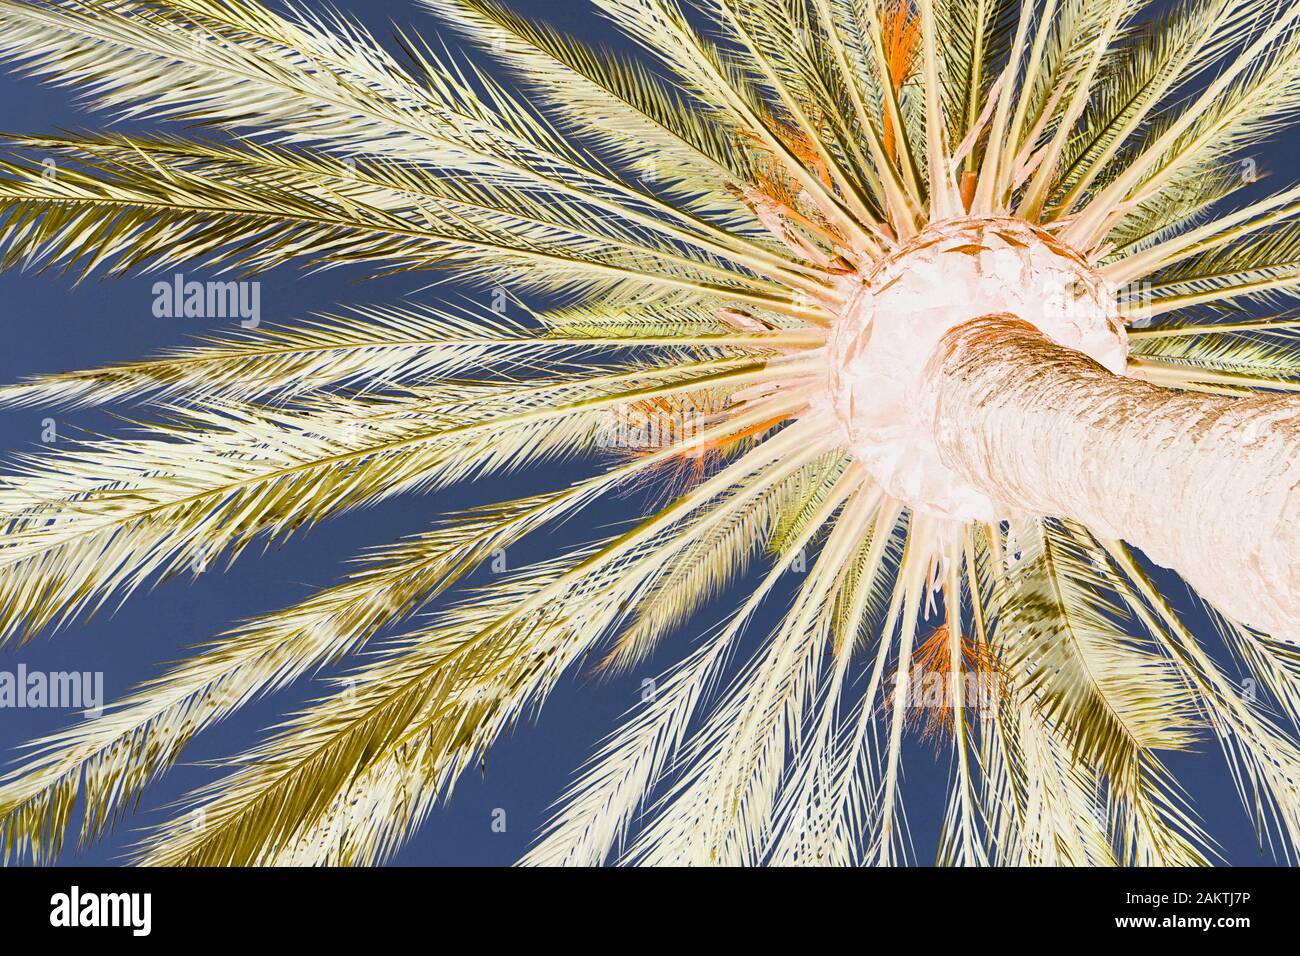 A stylised colourful image of the underside of a palm tree Stock Photo